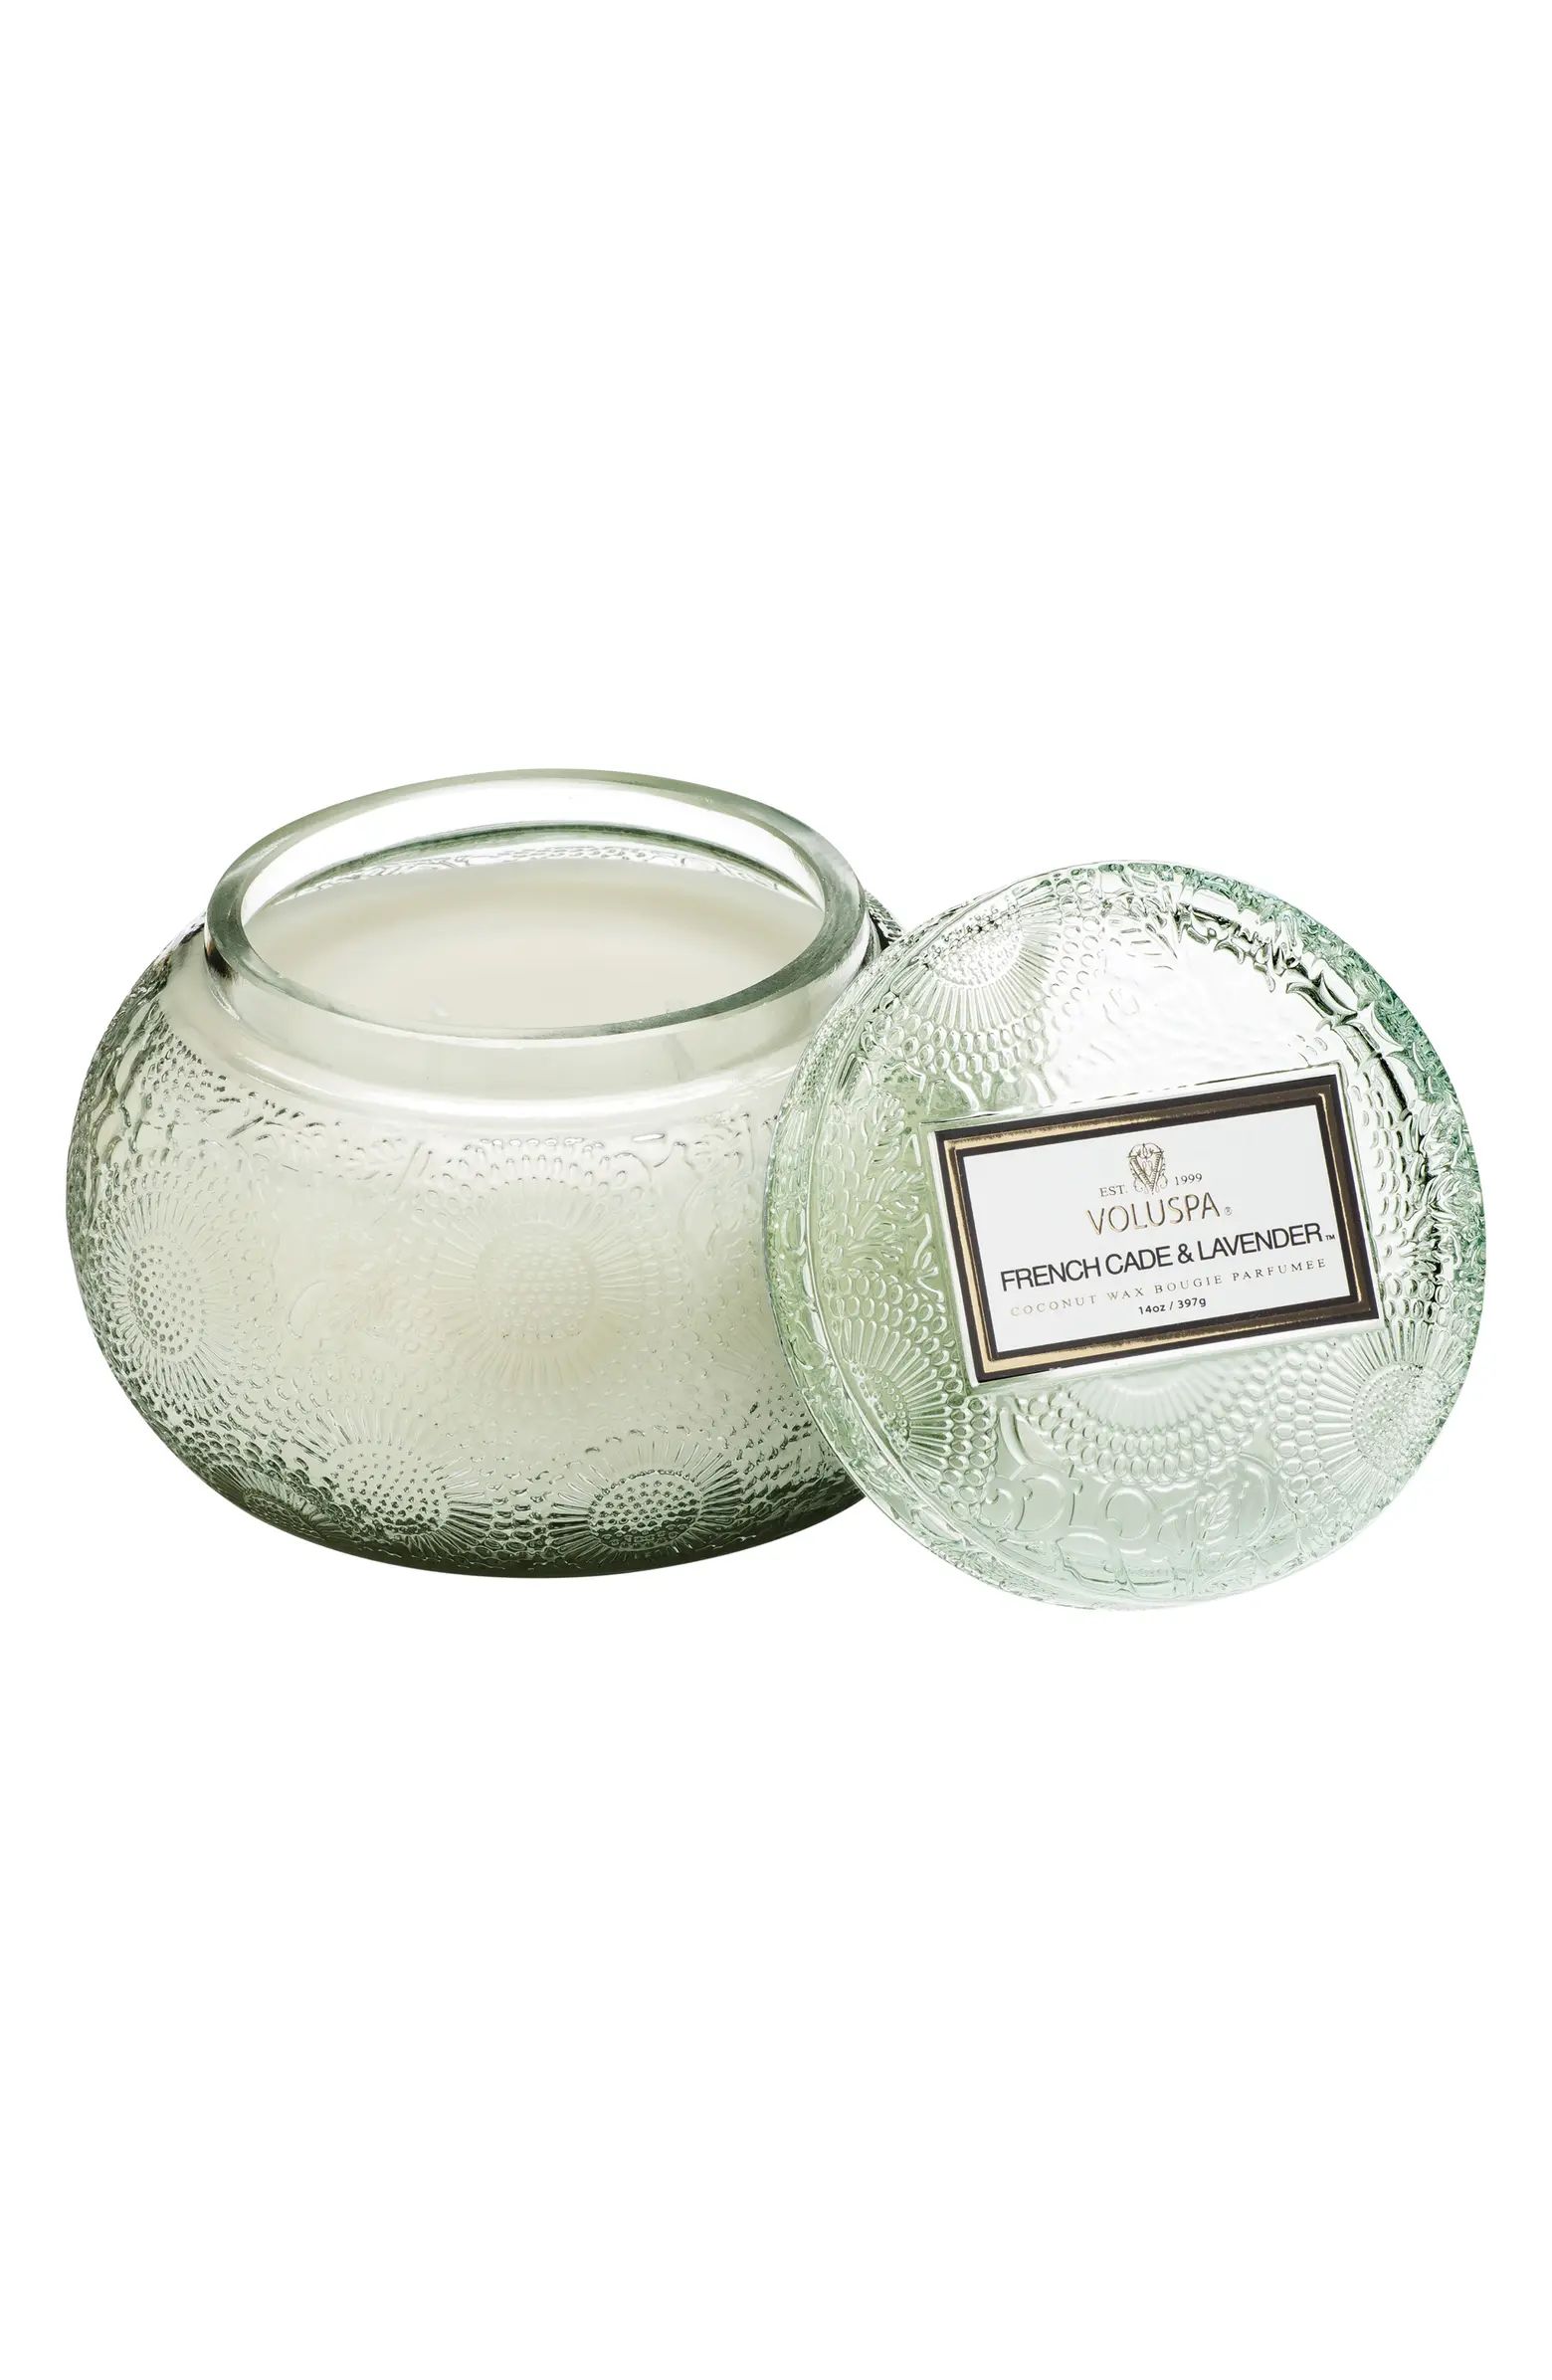 Voluspa Volupsa Japonica Chawan Bowl Two-Wick Embossed Glass Candle | Nordstrom | Nordstrom